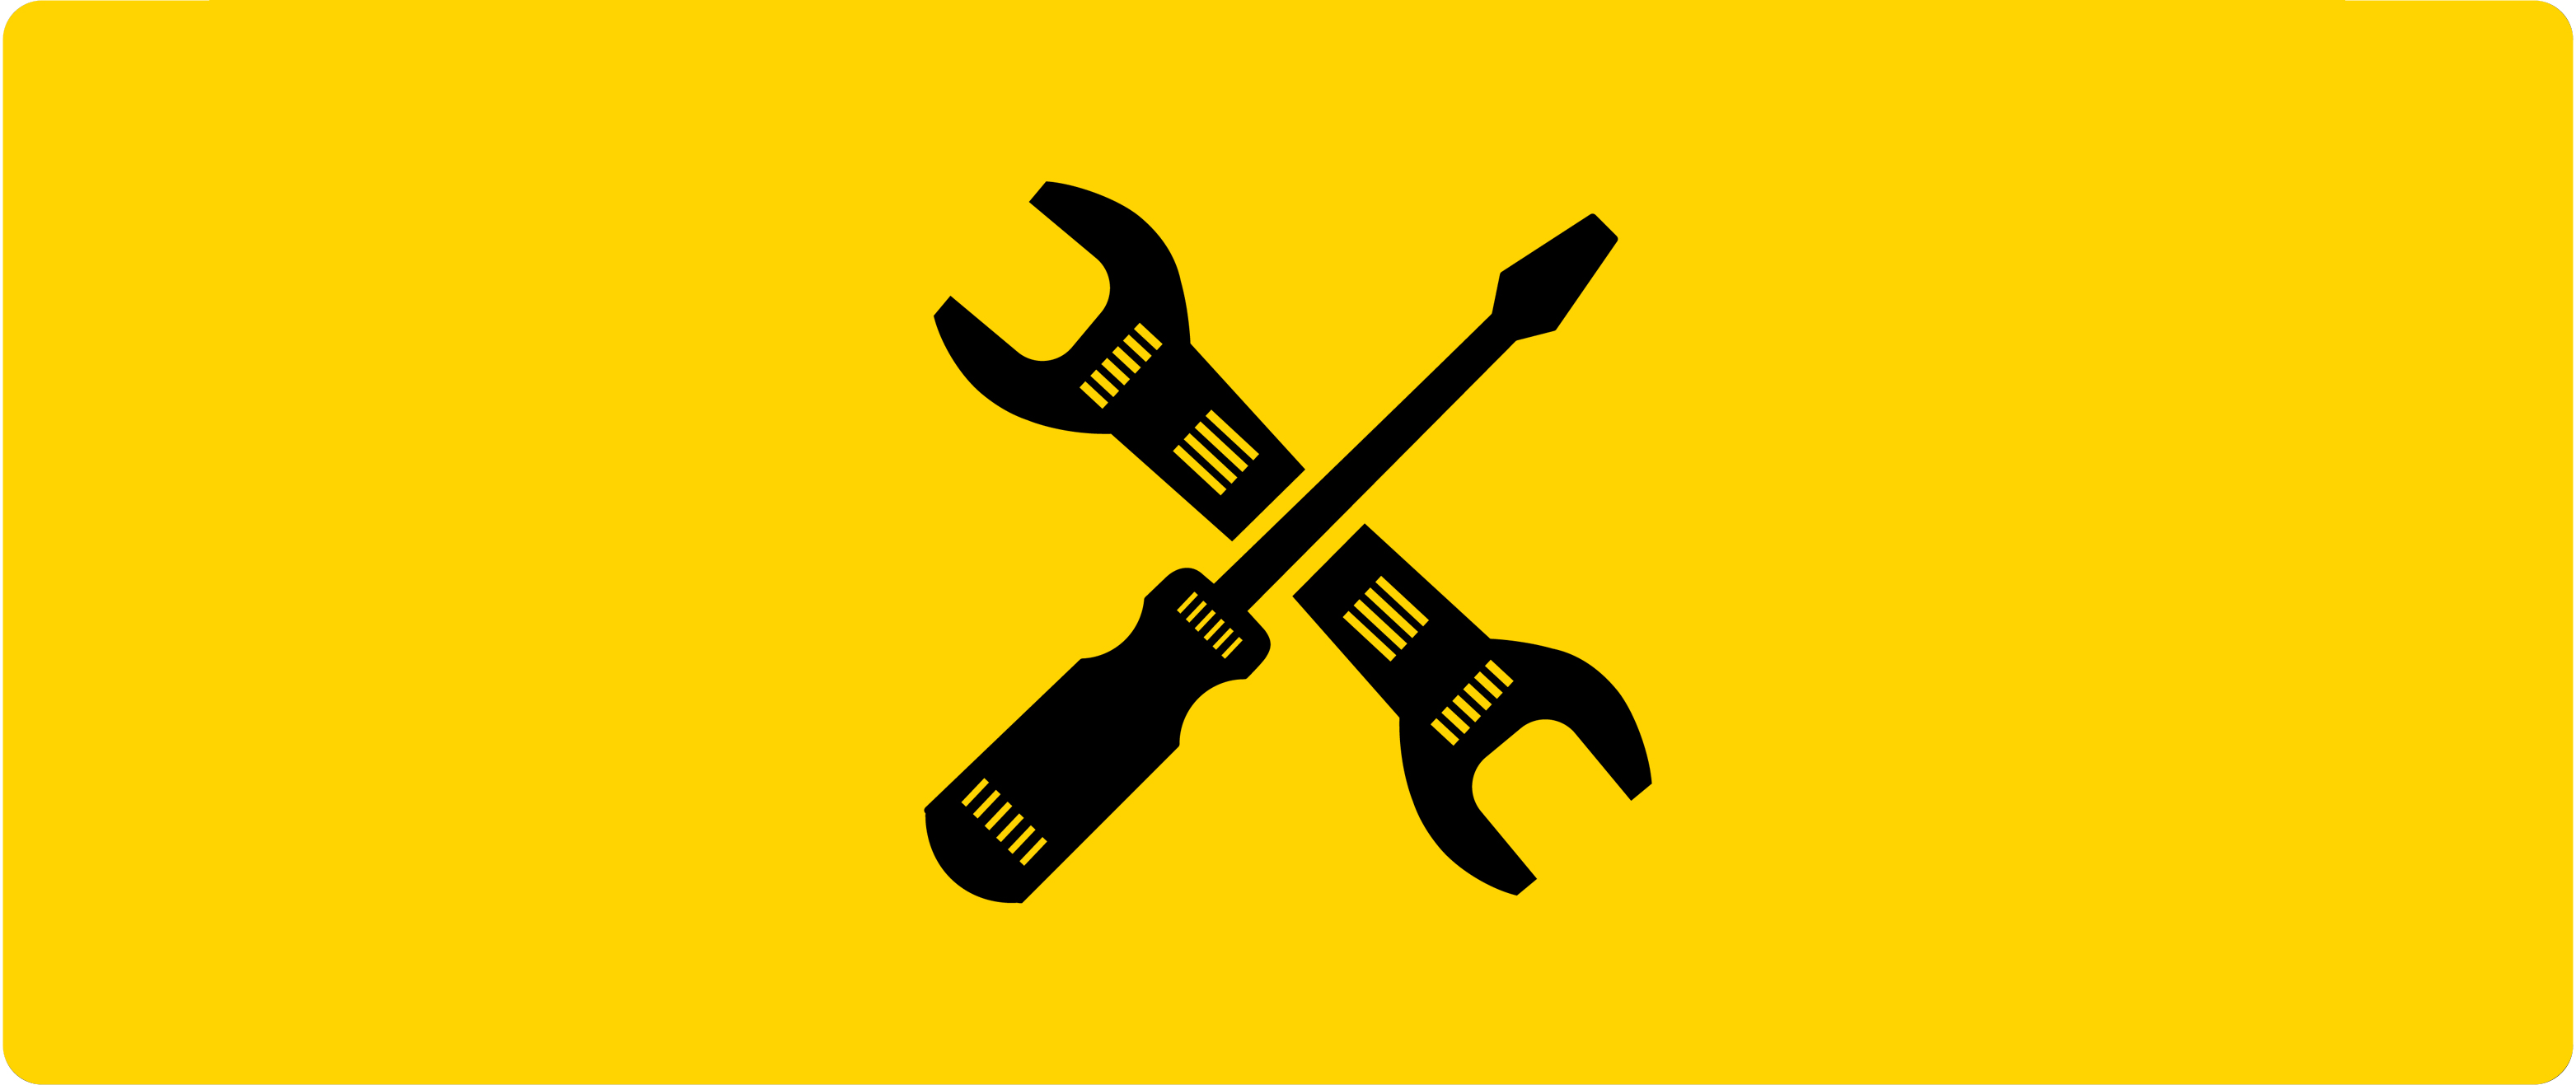 Yellow background with black line drawing of an evacuation chair and tools